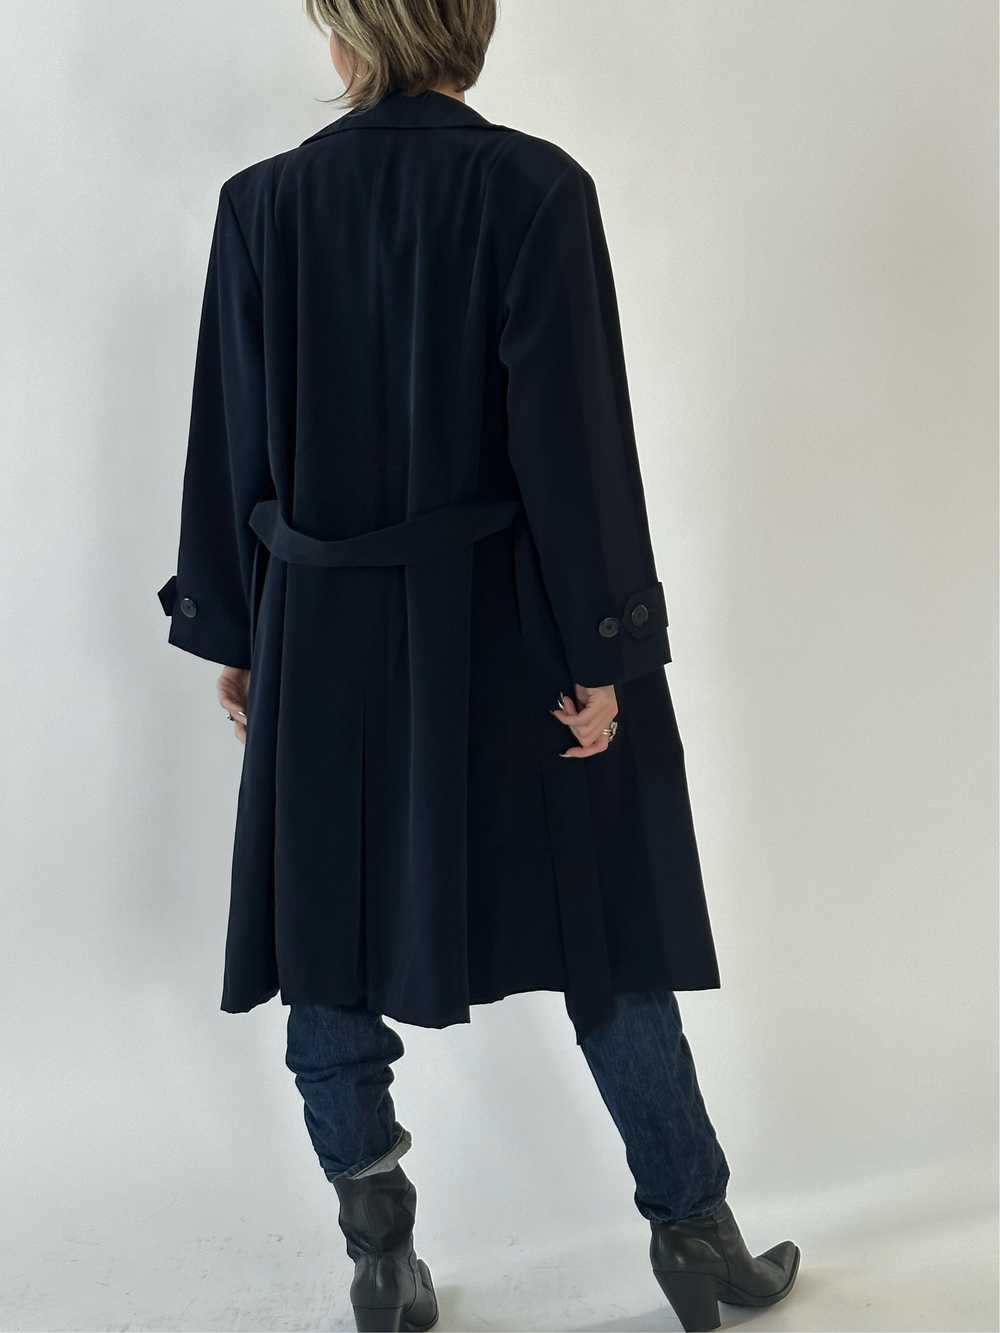 Vintage Navy Petite Trench - image 6